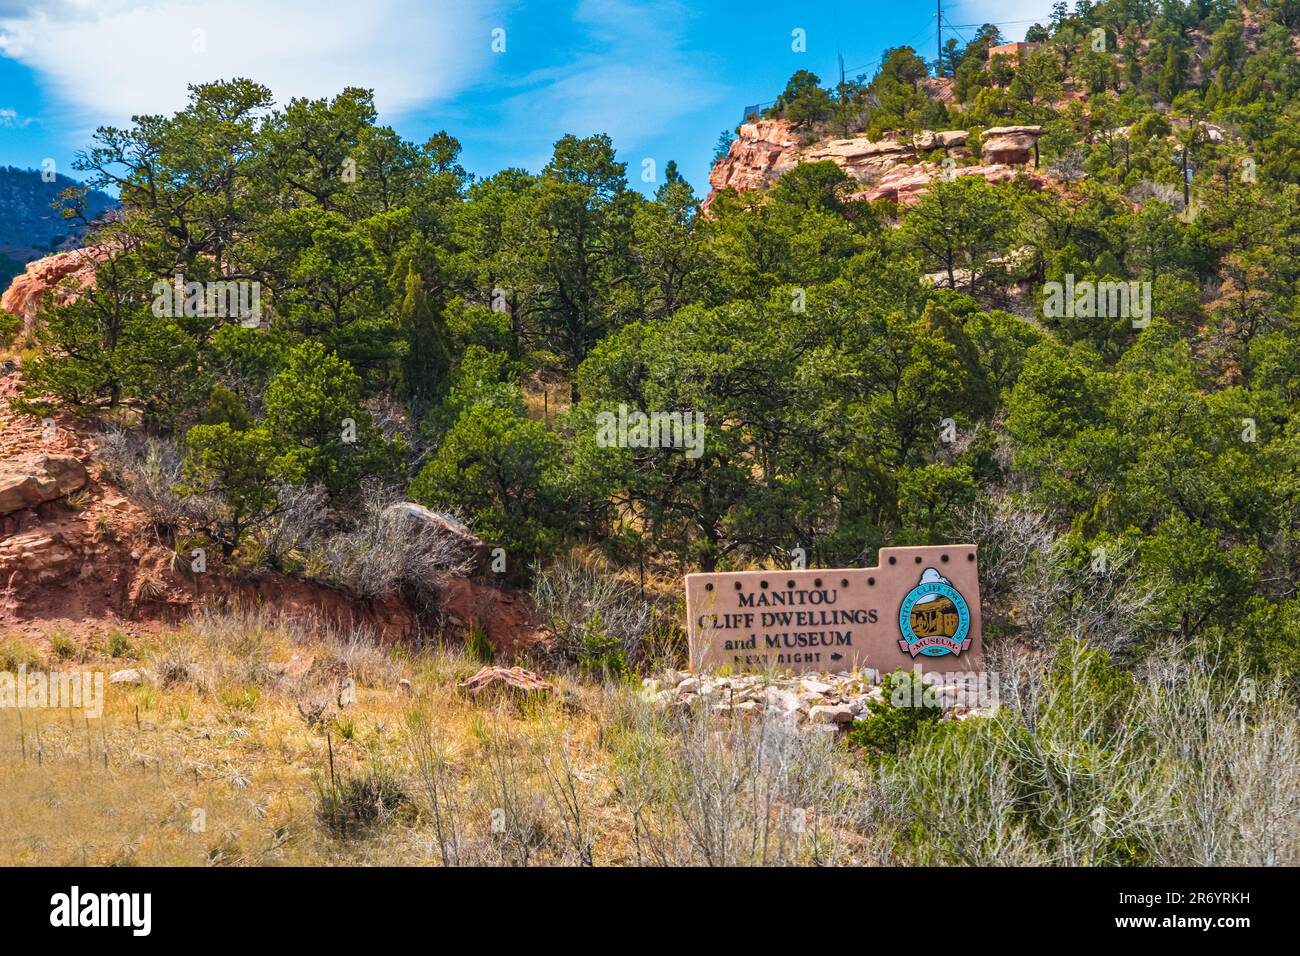 Colorado Springs, CO - May 06, 2022: The Manitou Cliff Dwellings and Museum Stock Photo